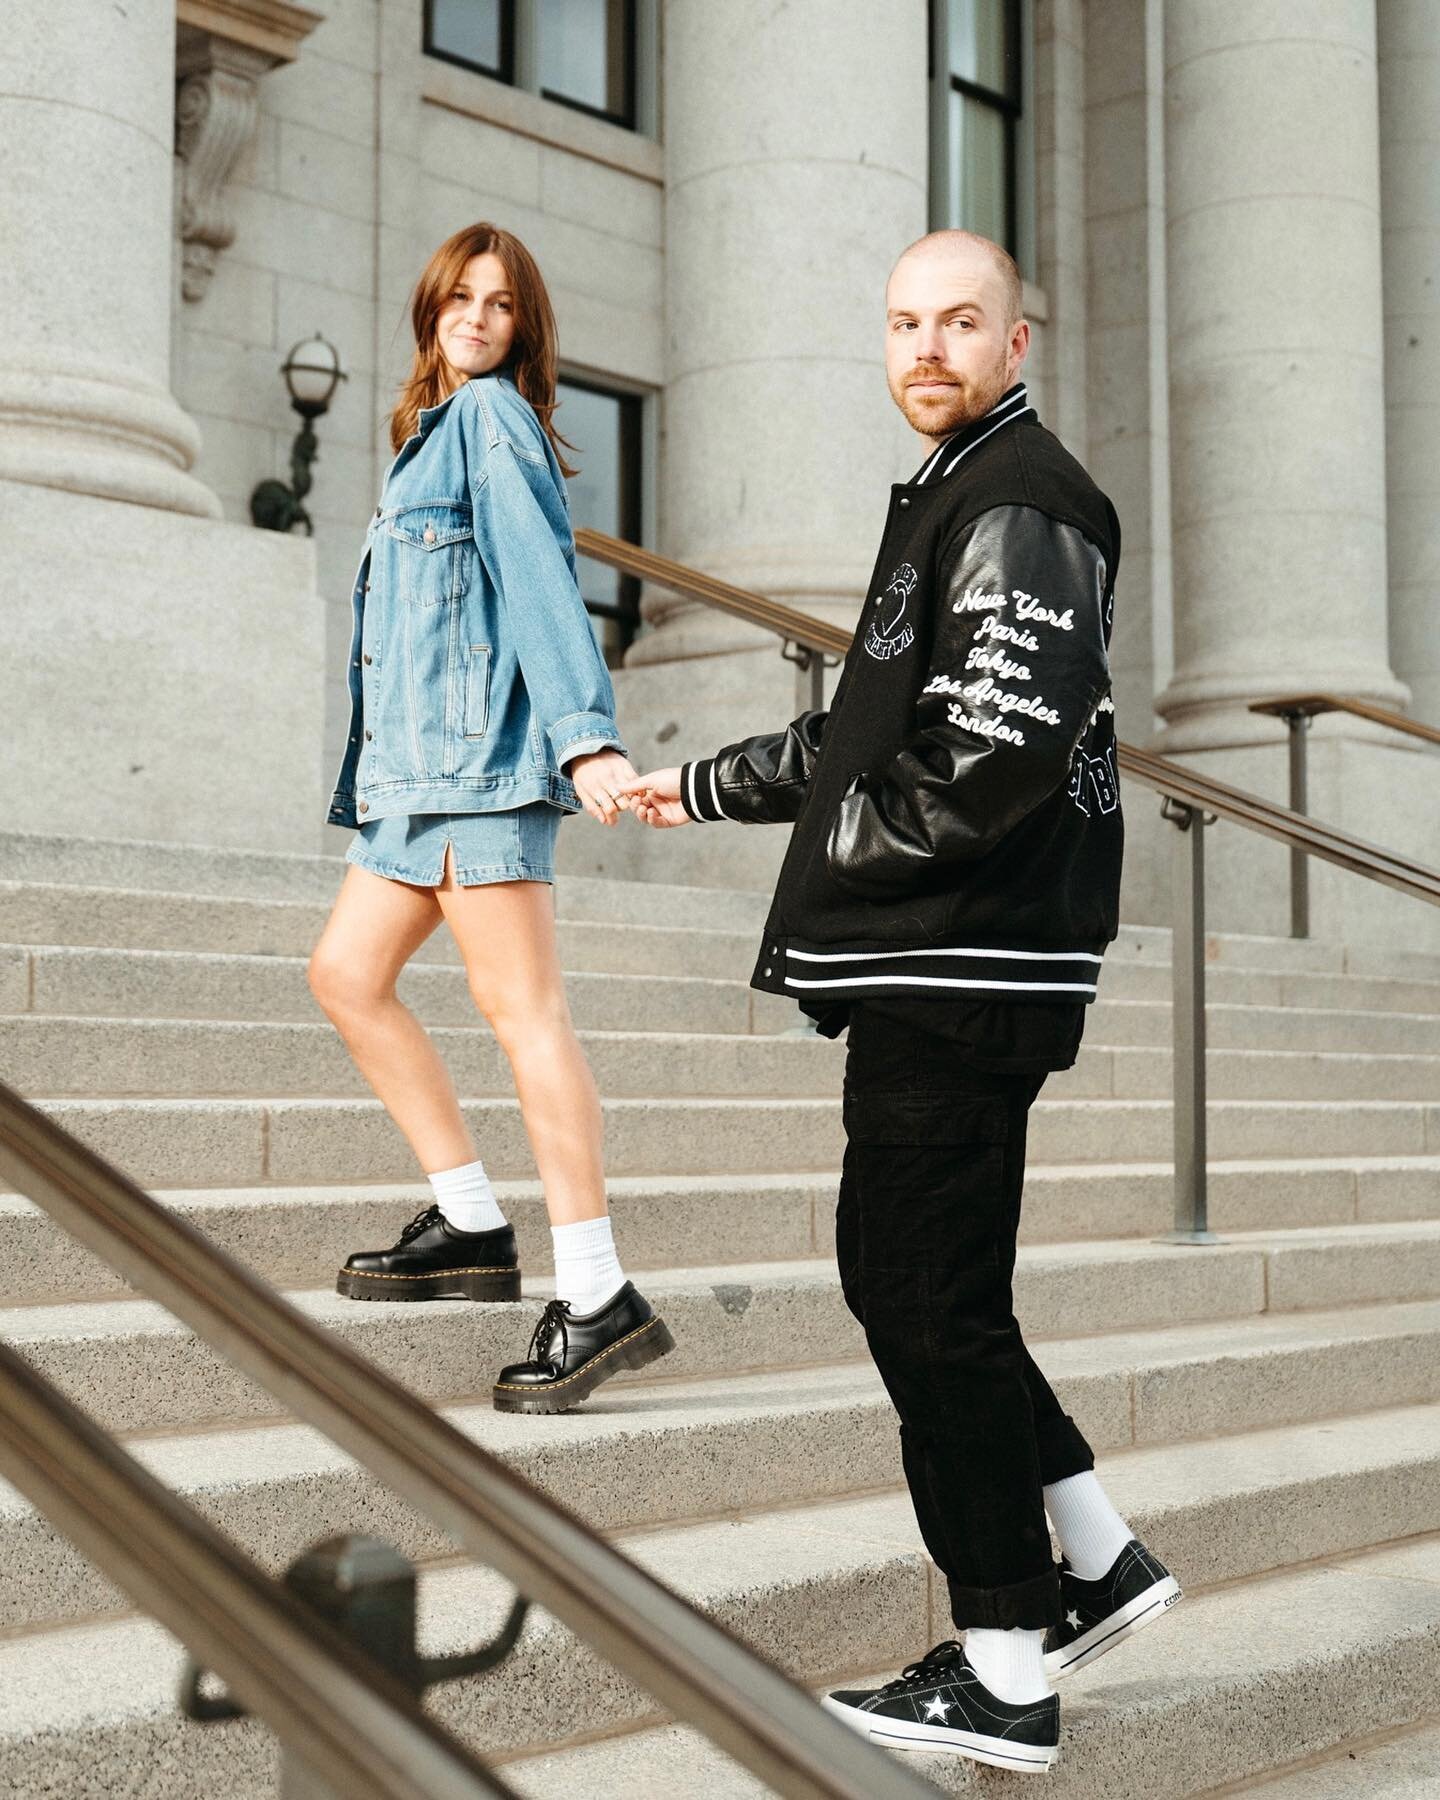 My gorgeous cousin and her incredible bf modeled for us at the Utah State Capitol building. This was the last shoot of the Abundance Photographer Retreat that I hosted in Salt Lake City last weekend. I cannot get enough of this set. ⚡️